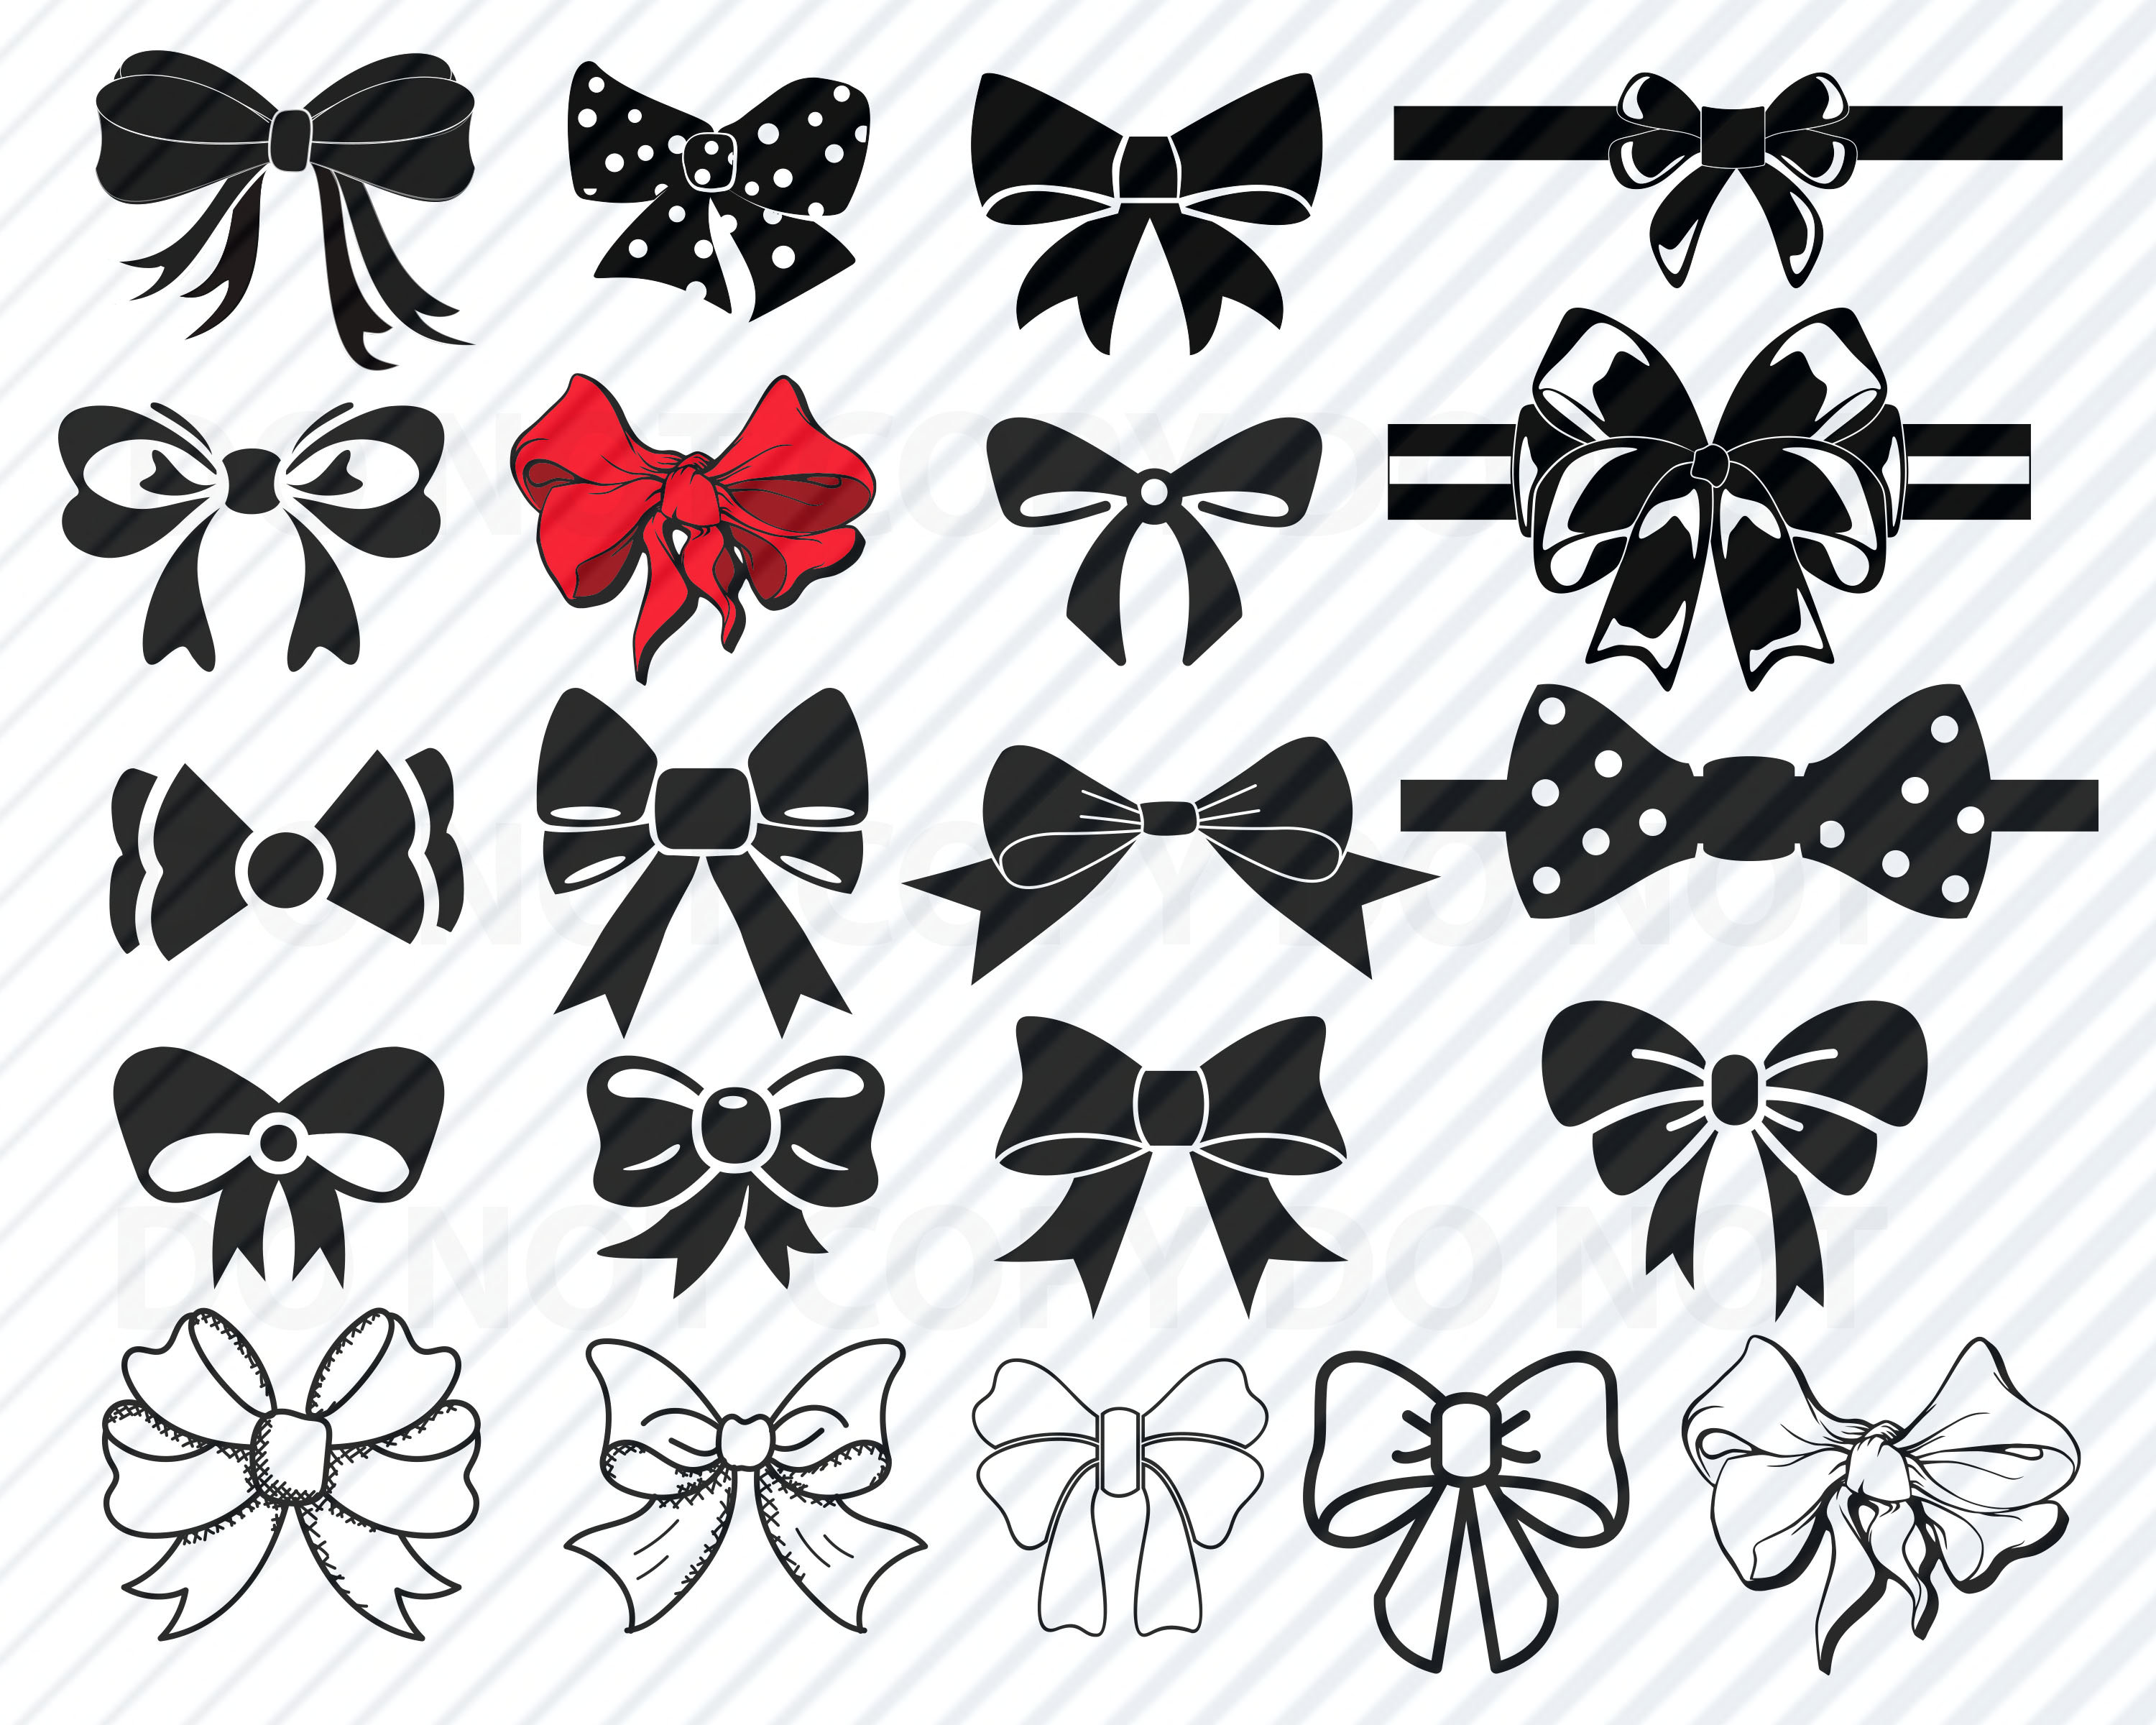 Ribbon Bows SVG File Vector Images Silhouette Hair Bow svg | Etsy